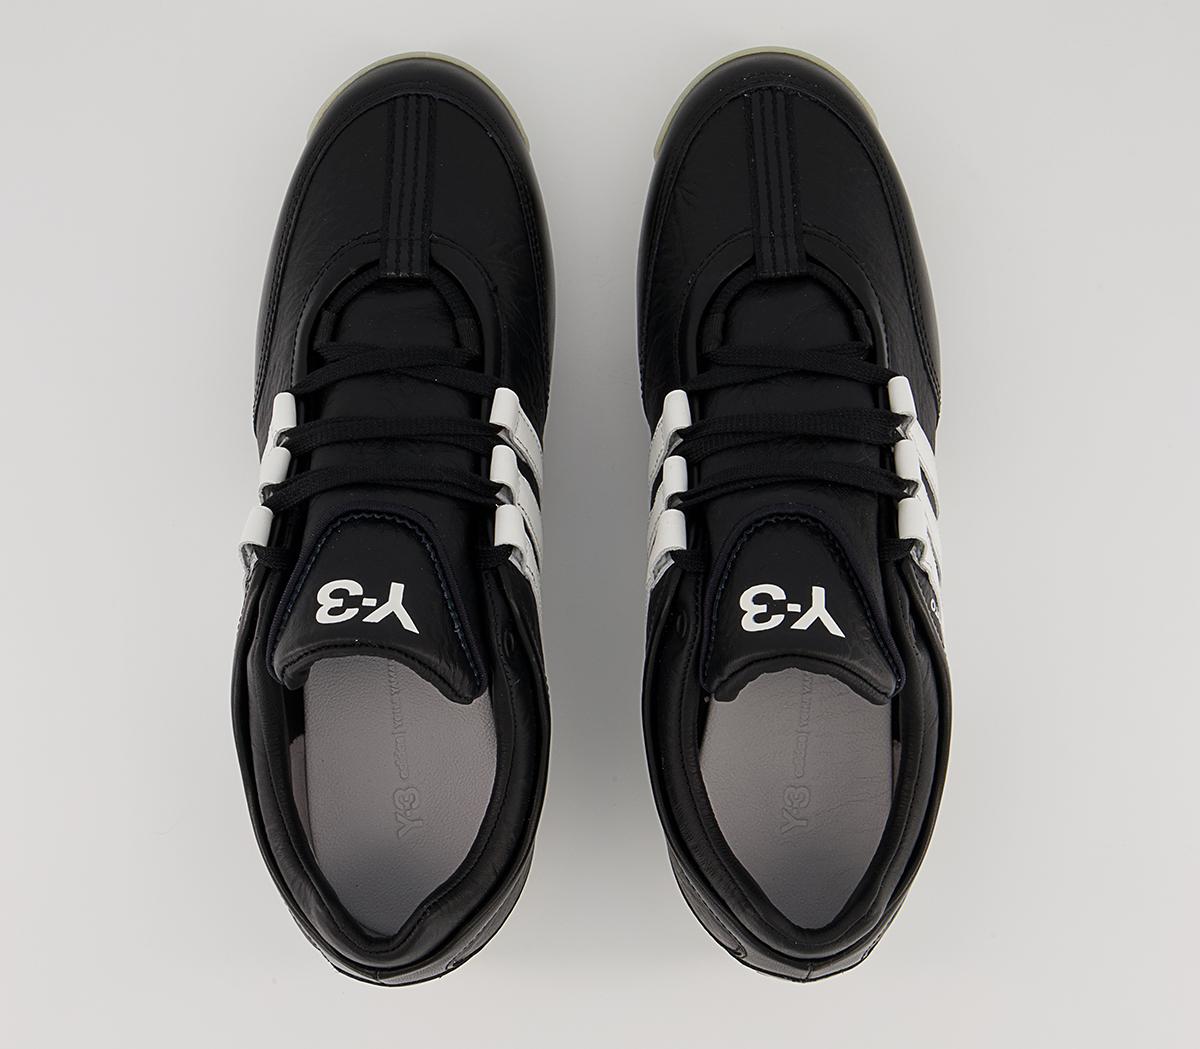 adidas Y-3 Y-3 Boxing Trainers Black Core White Easy Yellow - Men's ...